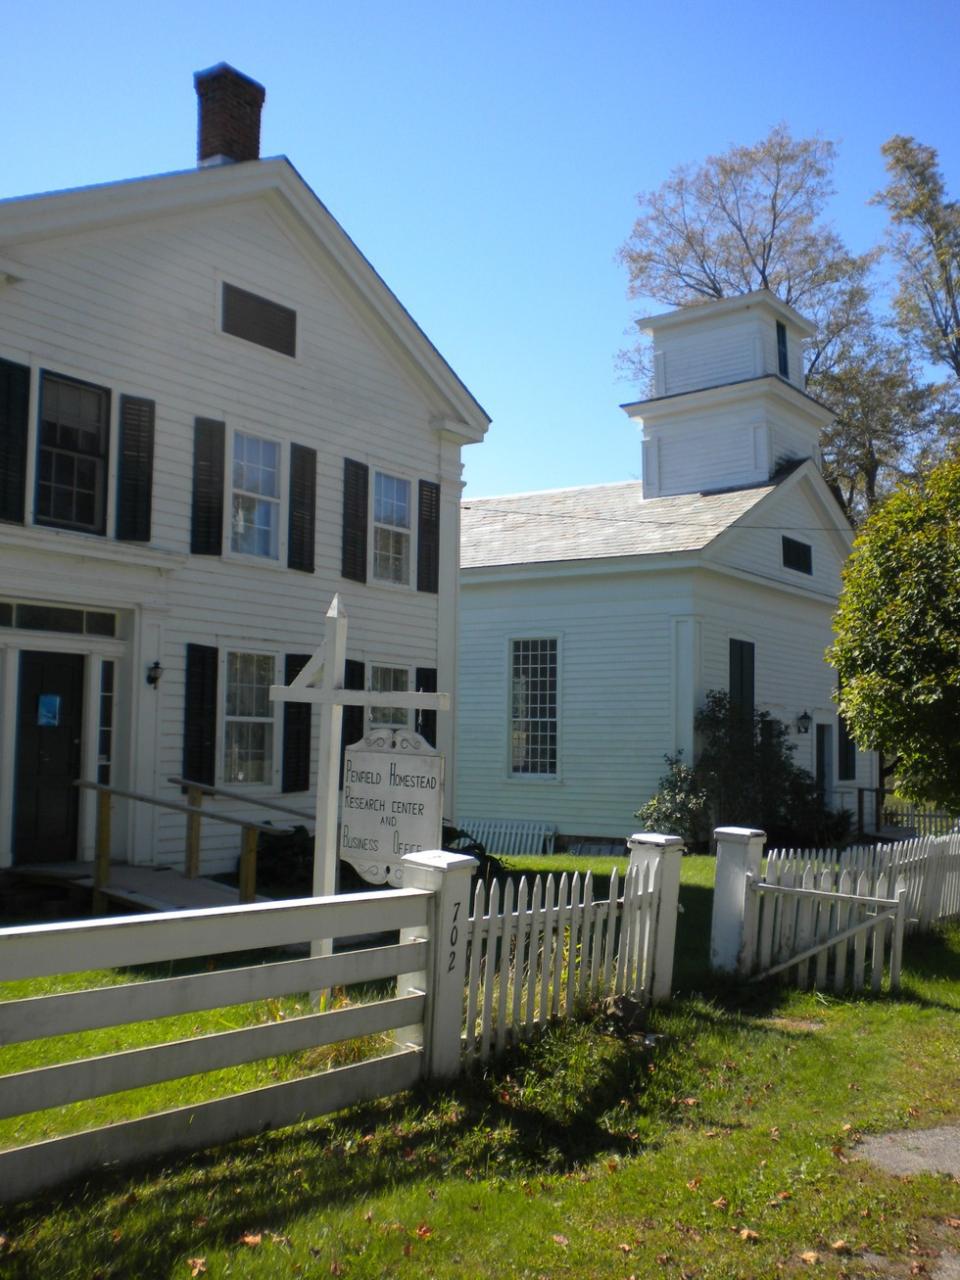 The home and church of the Penfield Homestead Research Center.